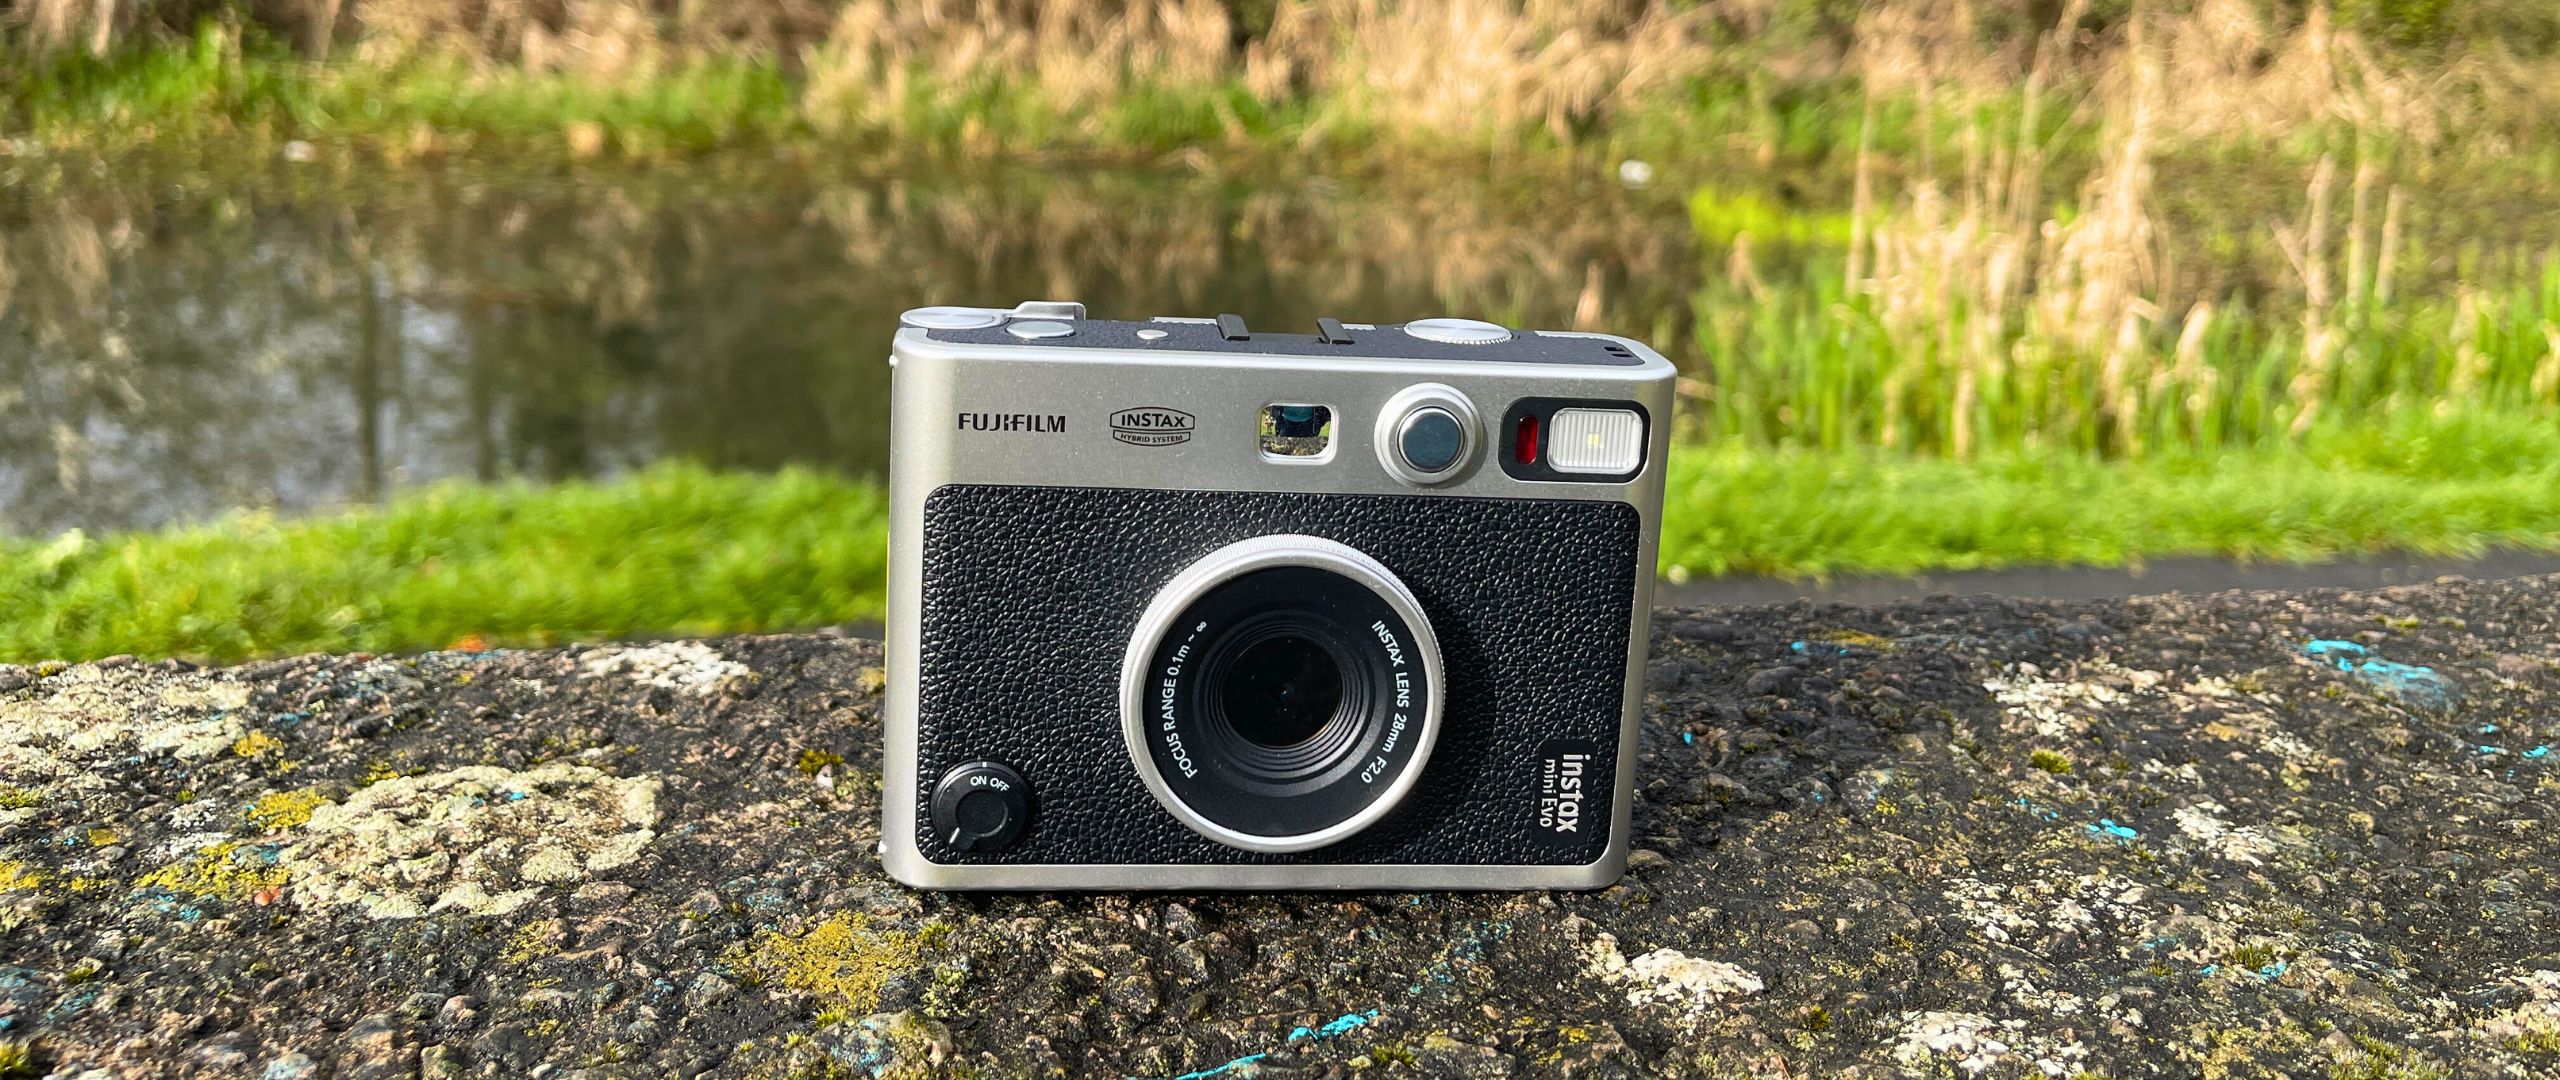 REVIEW: Fujifilm Instax Mini Evo 📸, Gallery posted by Chara Low